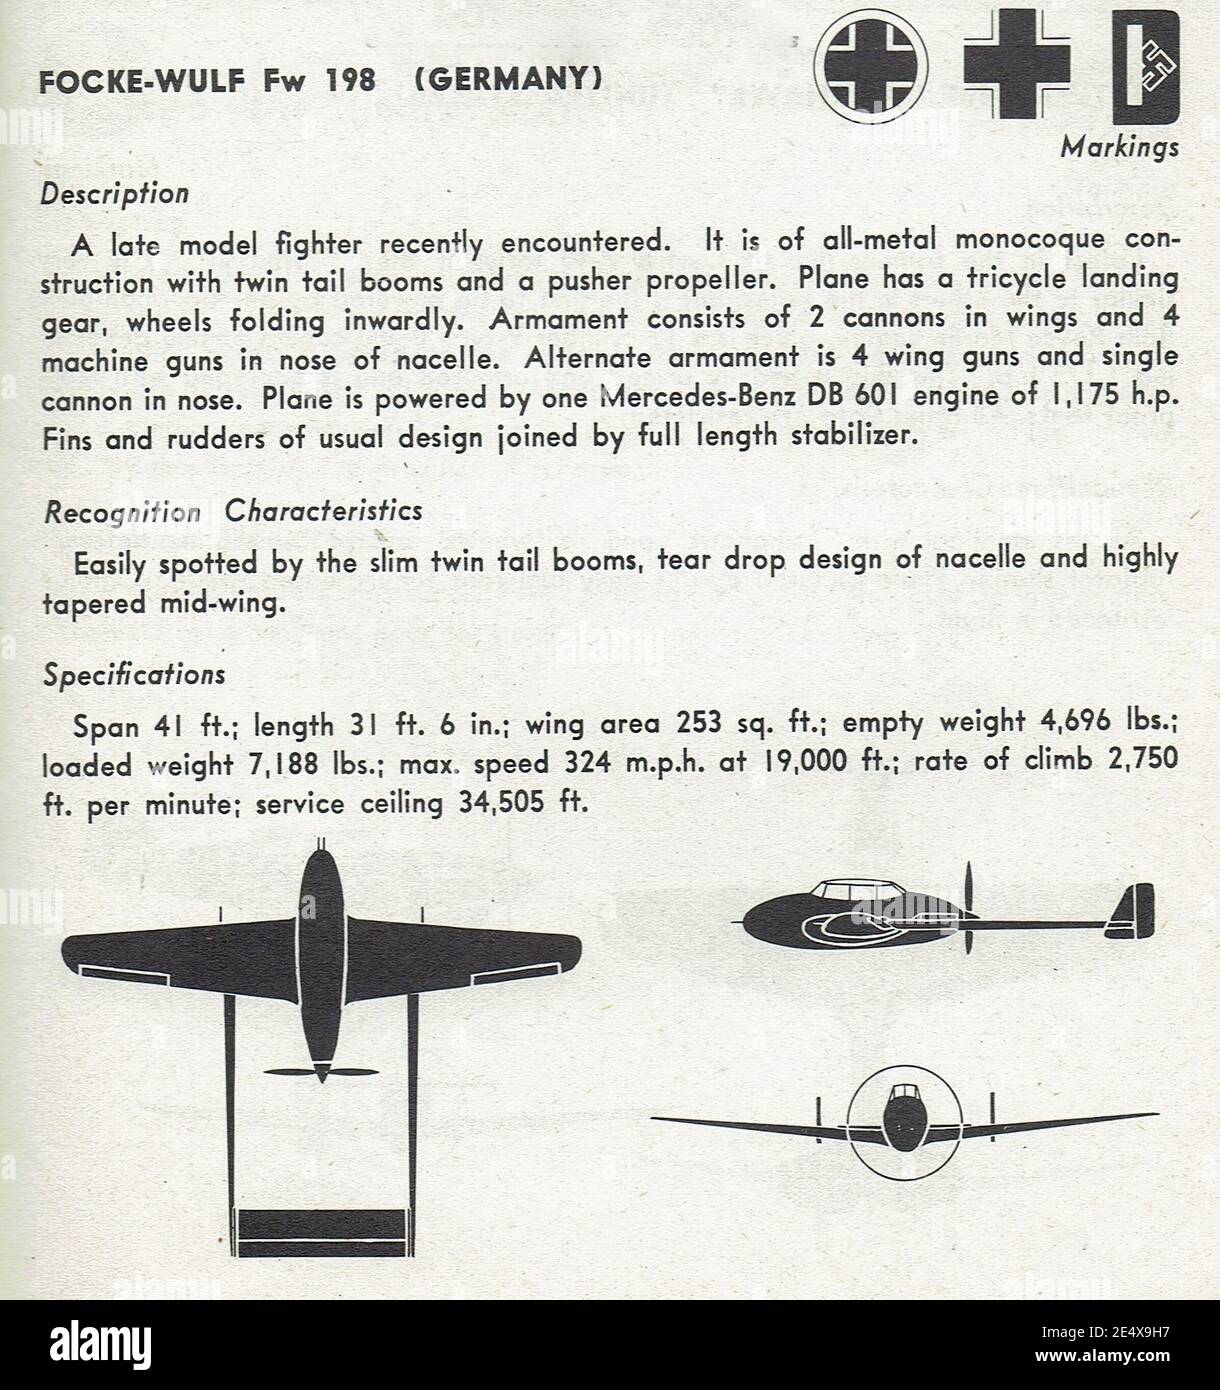 Locomotief dienblad talent Extract of focke wulf late model fighter from wwii aircraft spotter's guide  Stock Photo - Alamy